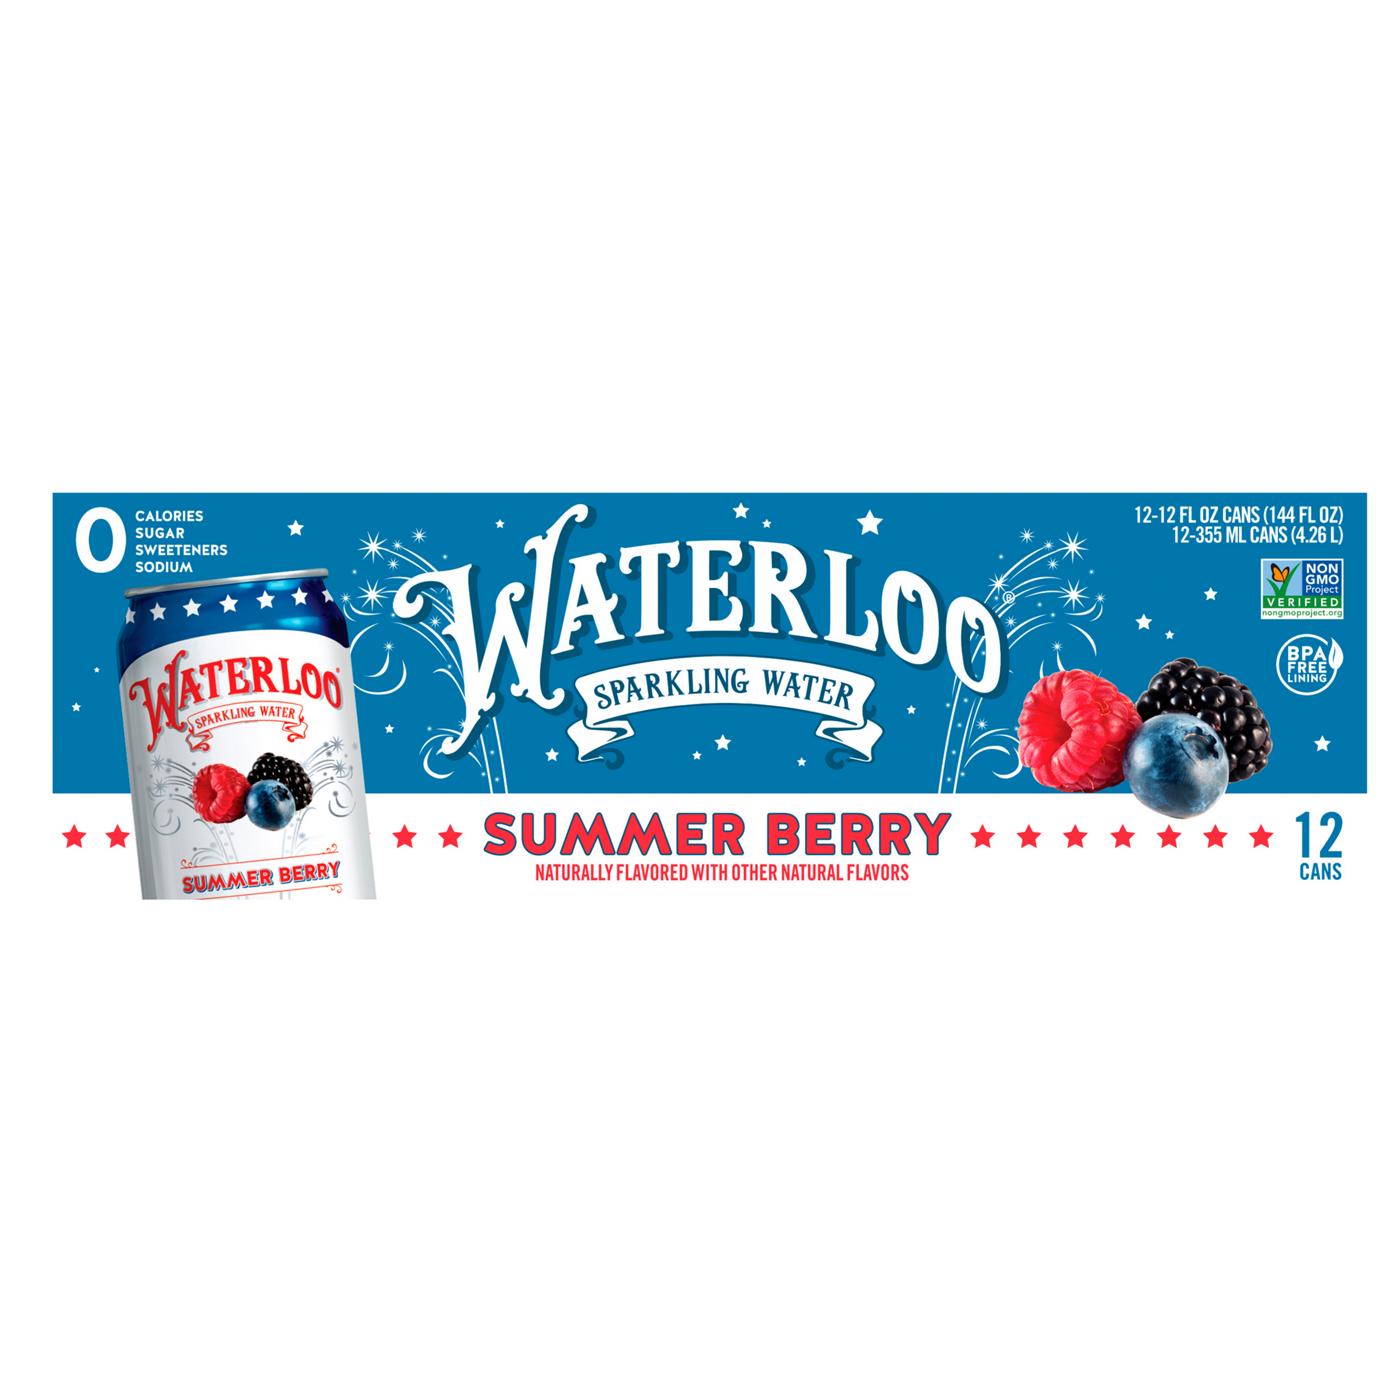 Waterloo Summer Berry Sparkling Water 12 pk Cans; image 1 of 2